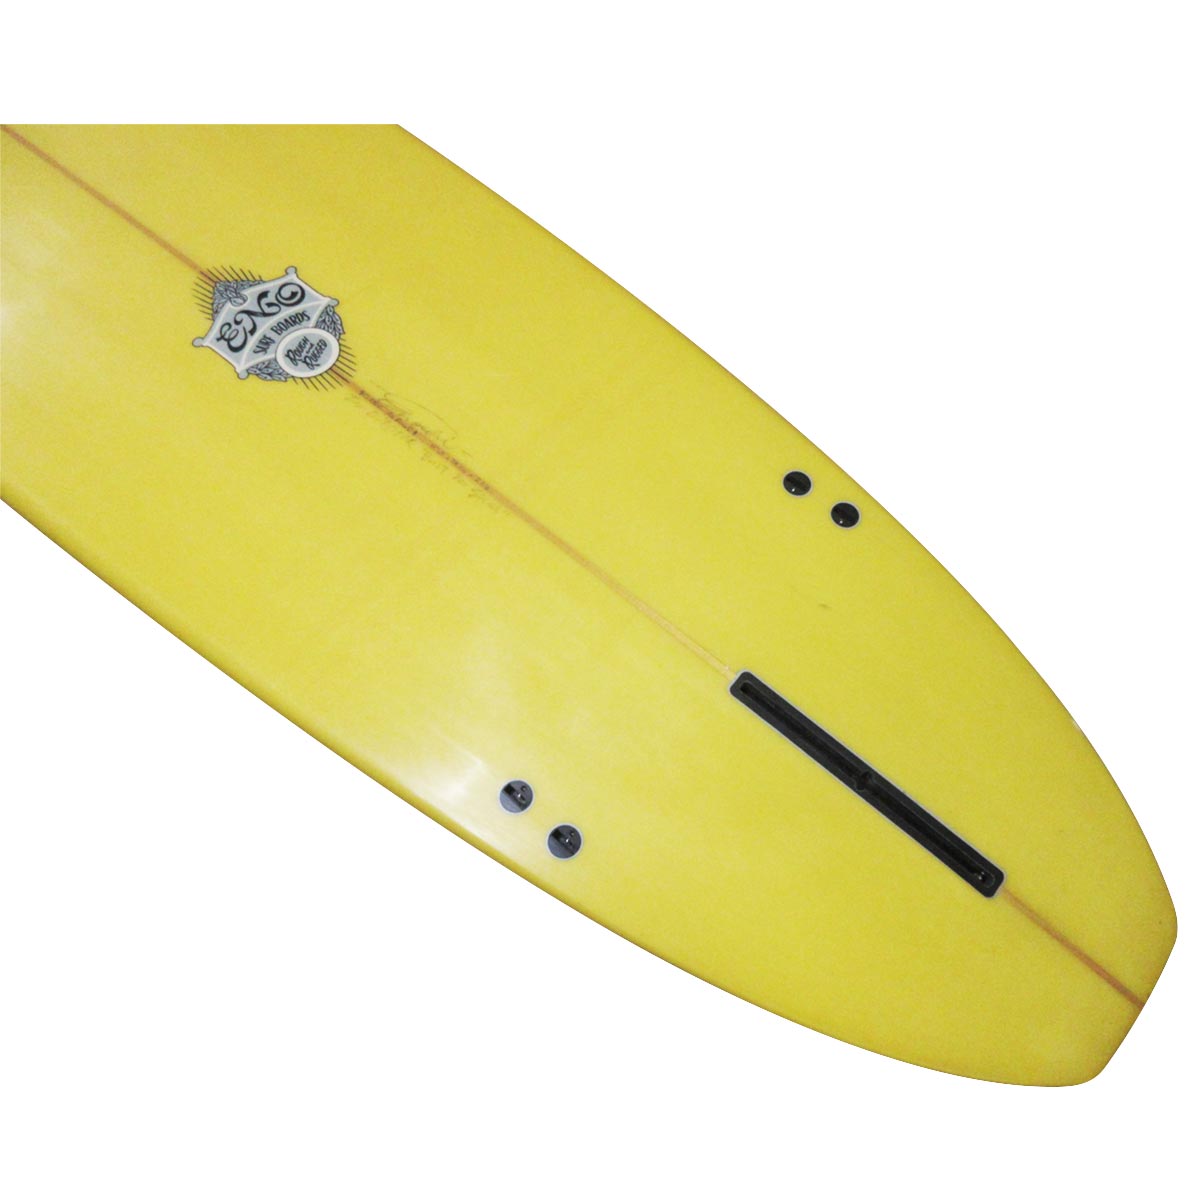 ENO SURFBOARDS / CLASSIC ALL ROUND 9`0